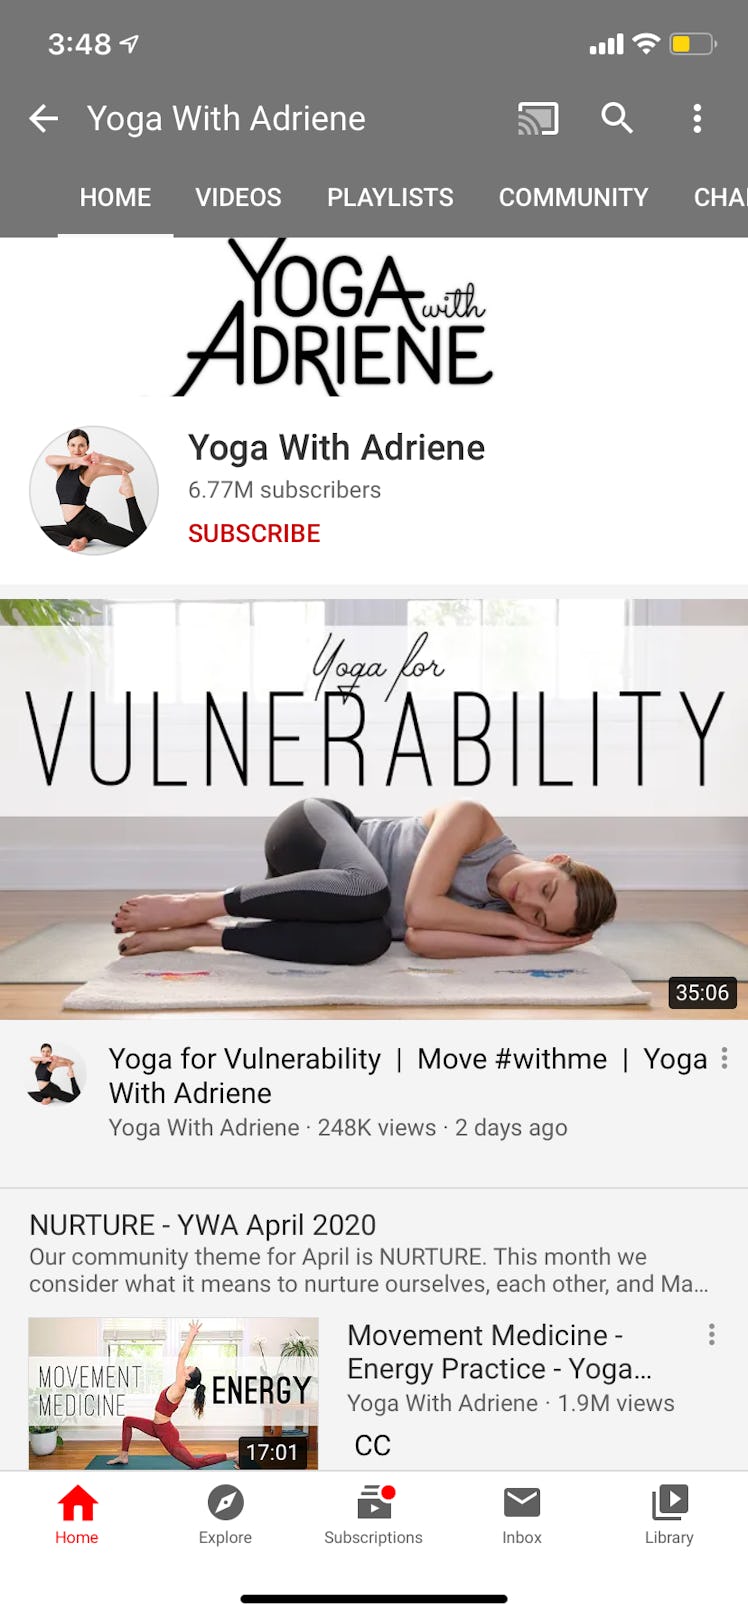 Yoga With Adriene on YouTube has tons of yoga videos for any situation.